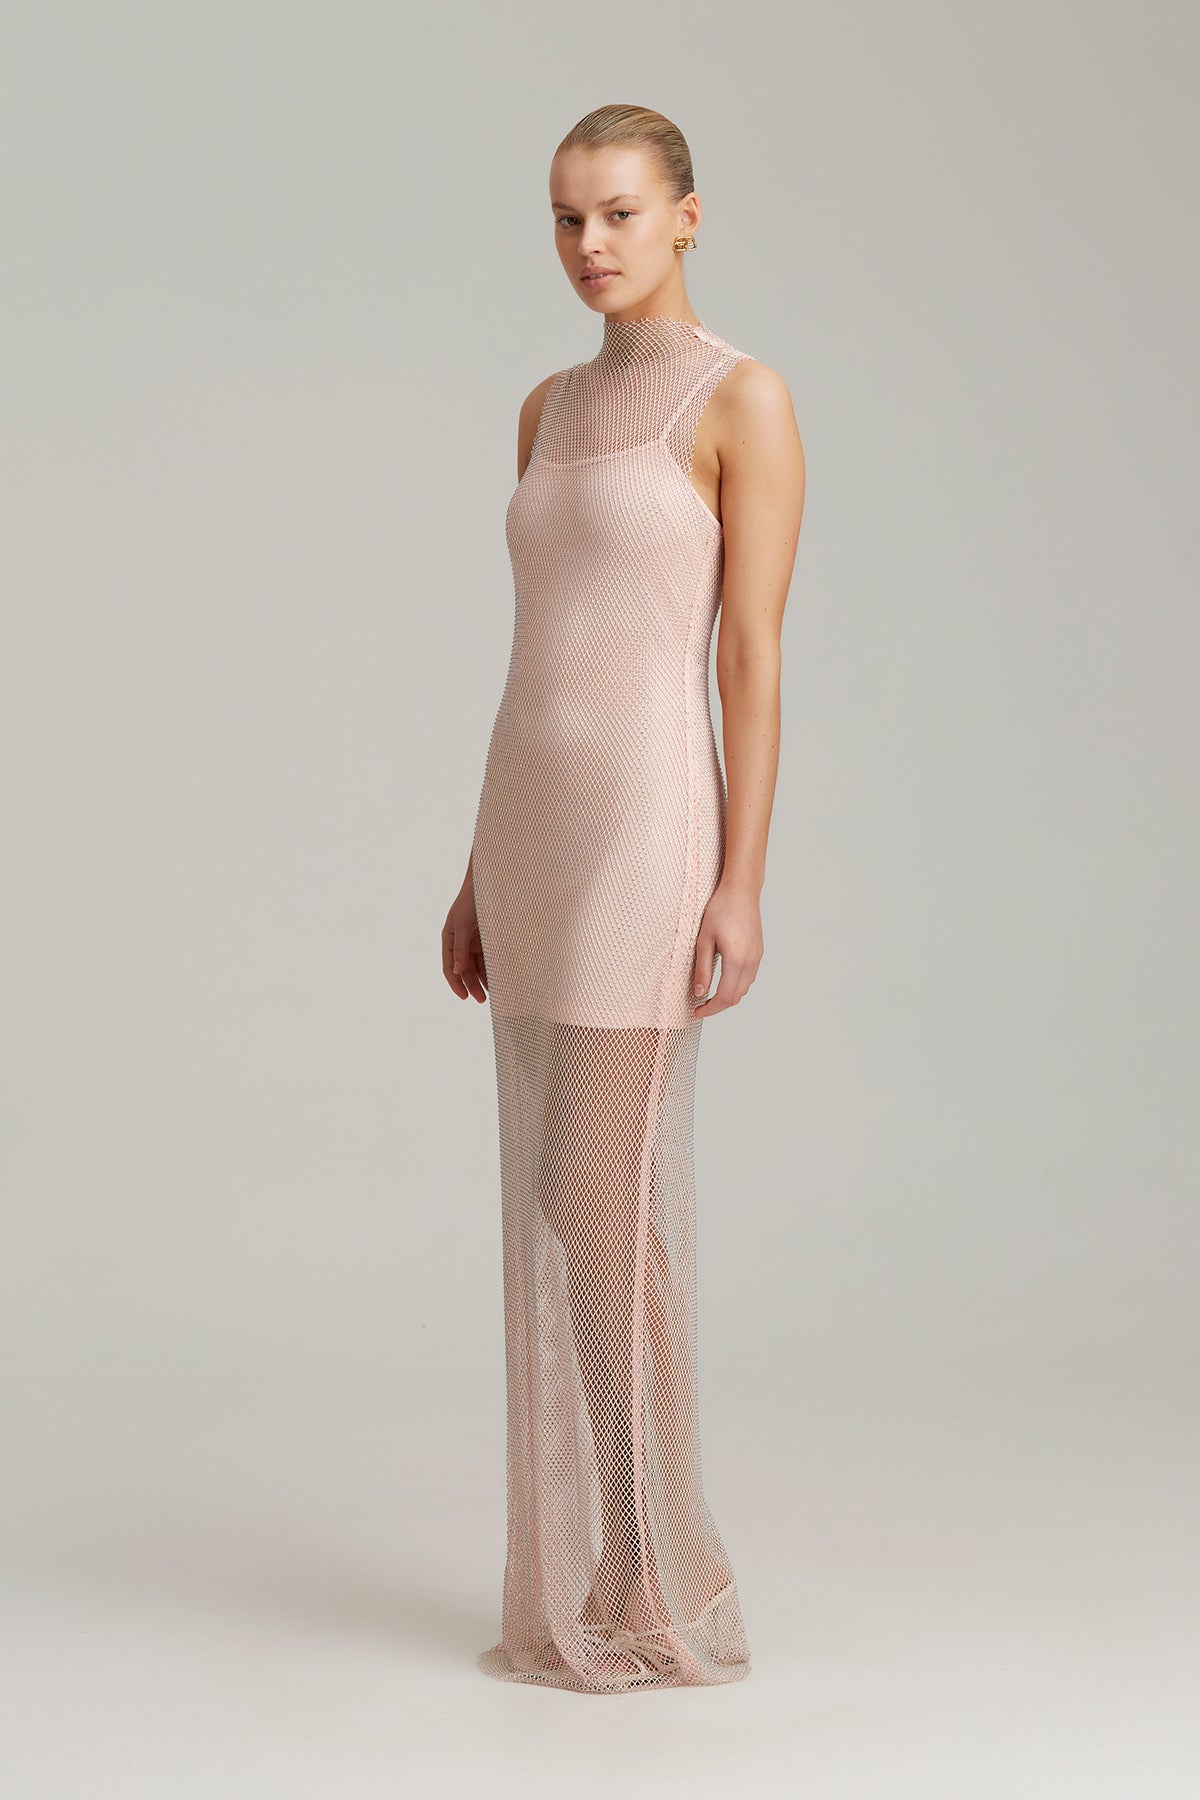 C/MEO Collective - Refraction Gown - Taffy